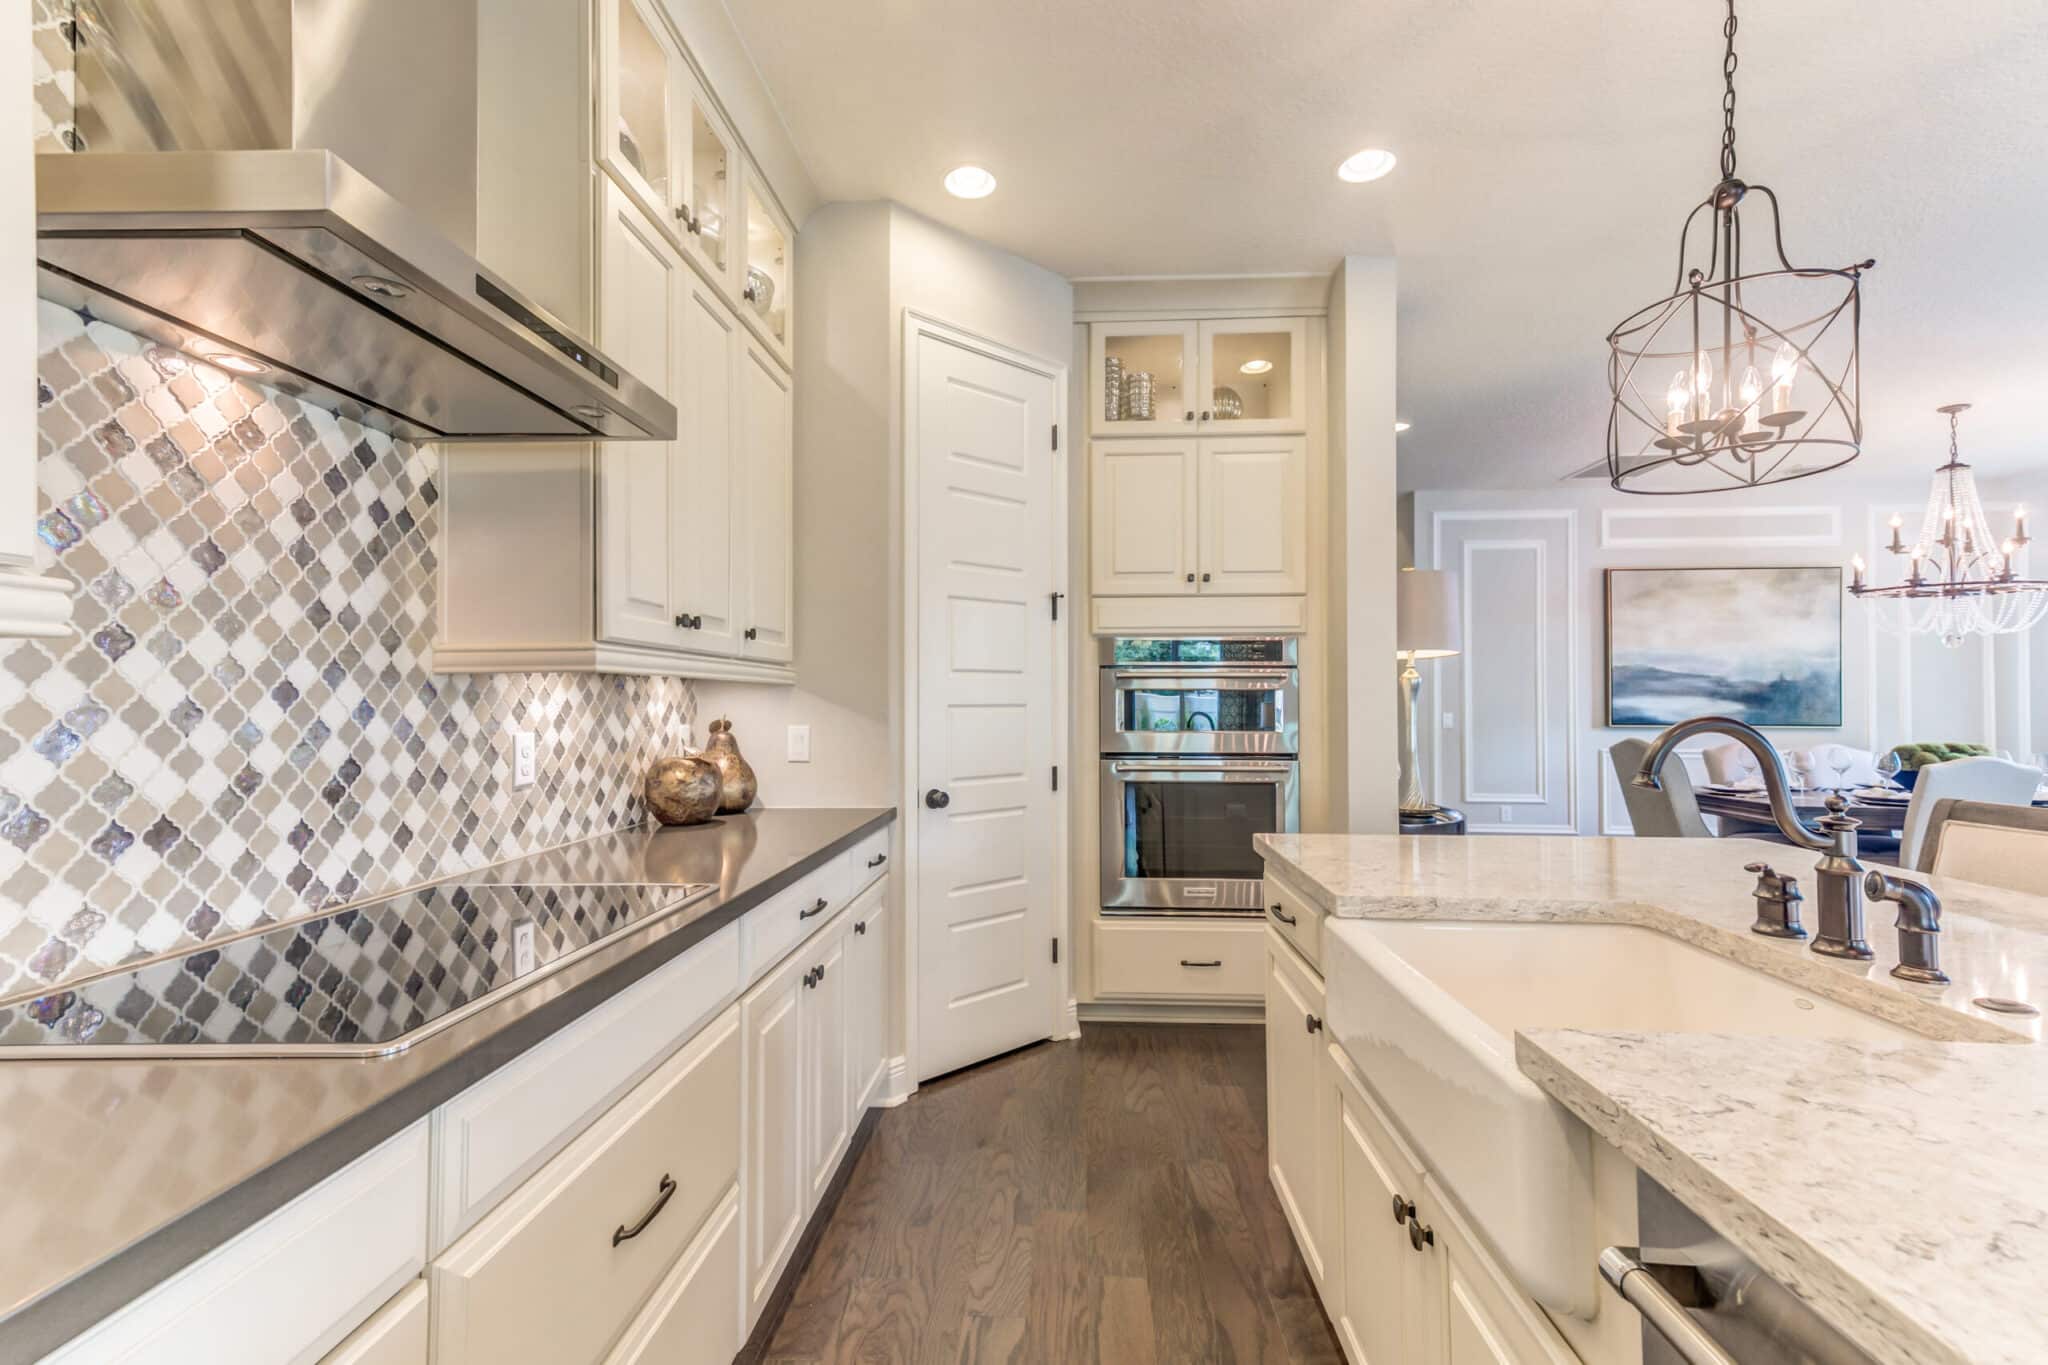 What Are the Benefits of Kitchen Remodeling?